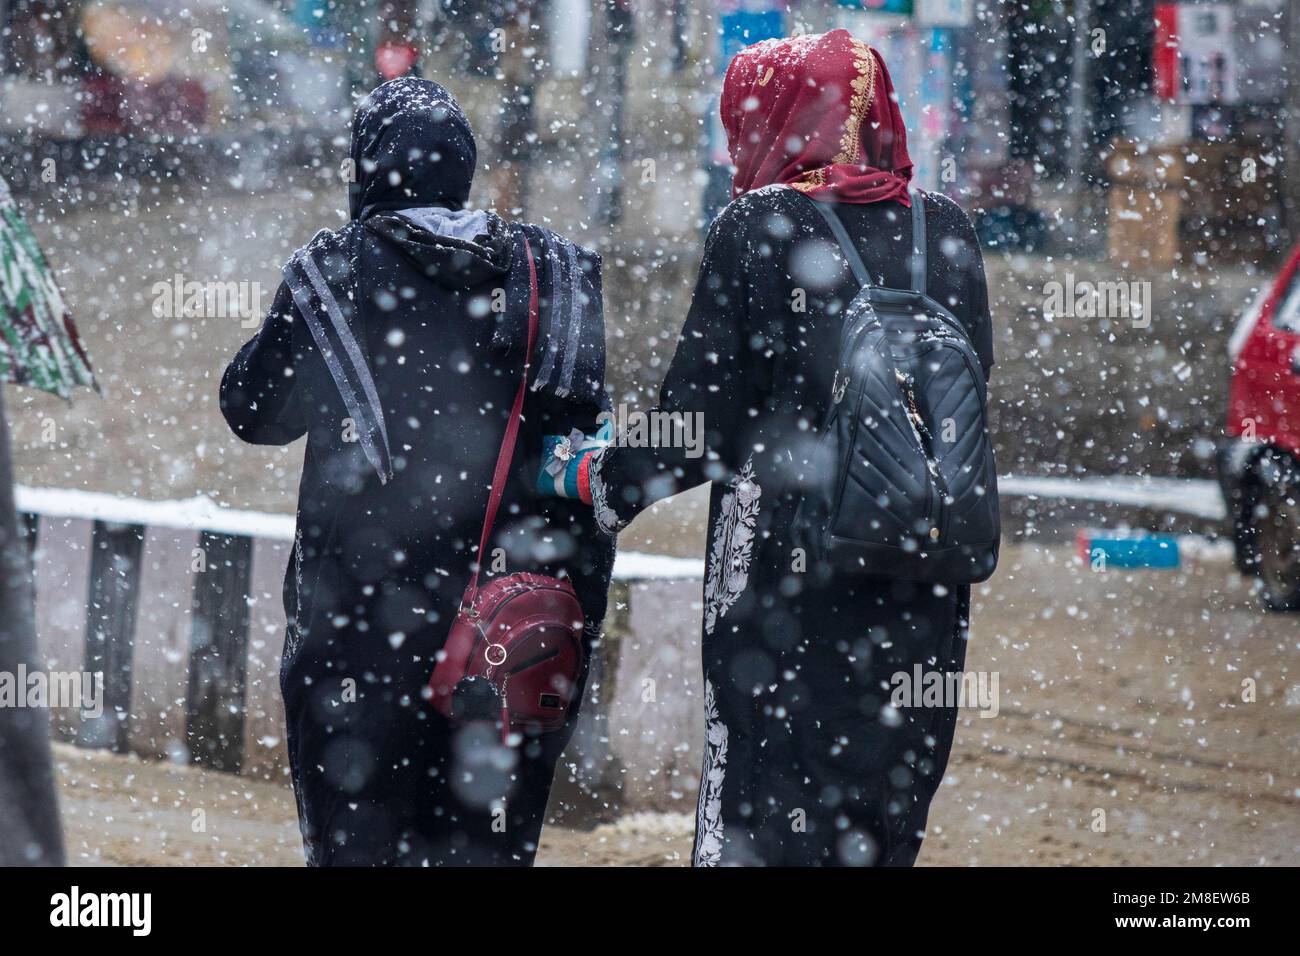 Students walk through a street amid ongoing heavy snowfall on the outskirts of Srinagar. At least two labourers killed on Thursday after an avalanche hits high-altitude area in central Kashmir's Sonamarg. Most parts of Kashmir received fresh snowfall that leading to the closure of Kashmir capital's main highway that connects disputed region with the rest of India. Meanwhile airport authorities suspended all flight operations till further notice due to continuous snowfall and low visibility. (Photo by Faisal Bashir/SOPA Images/Sipa USA) Stock Photo